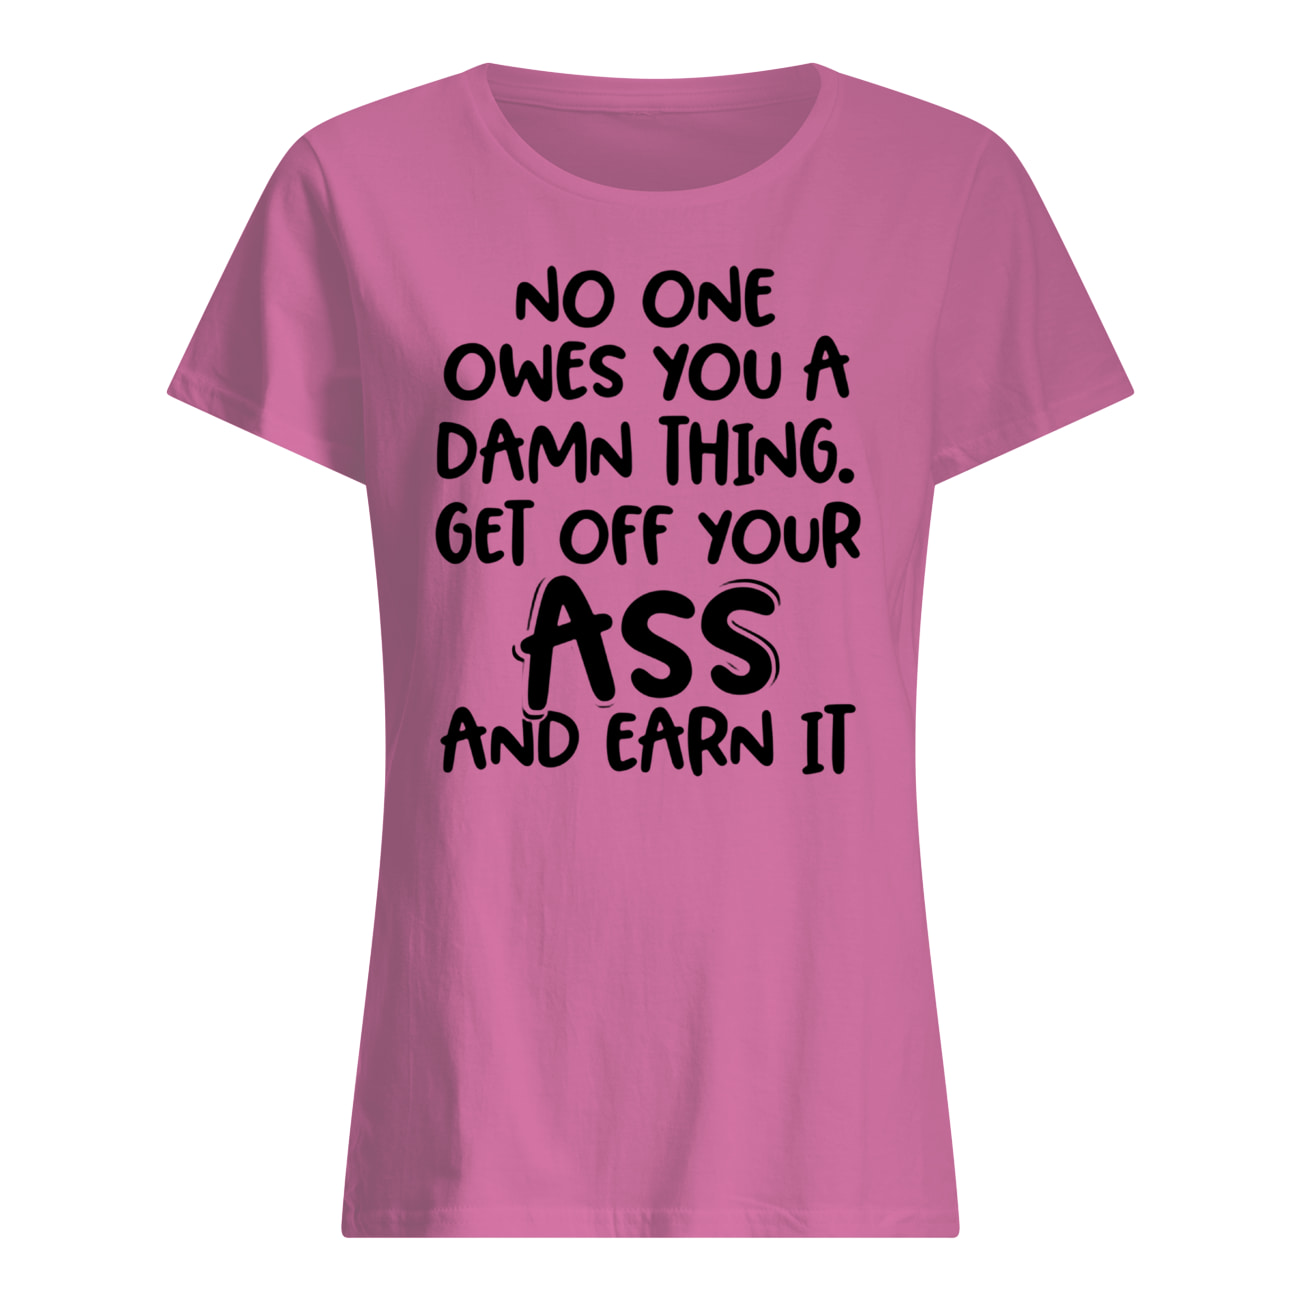 No one owes you a damn thing get off your ass and earn it womens shirt